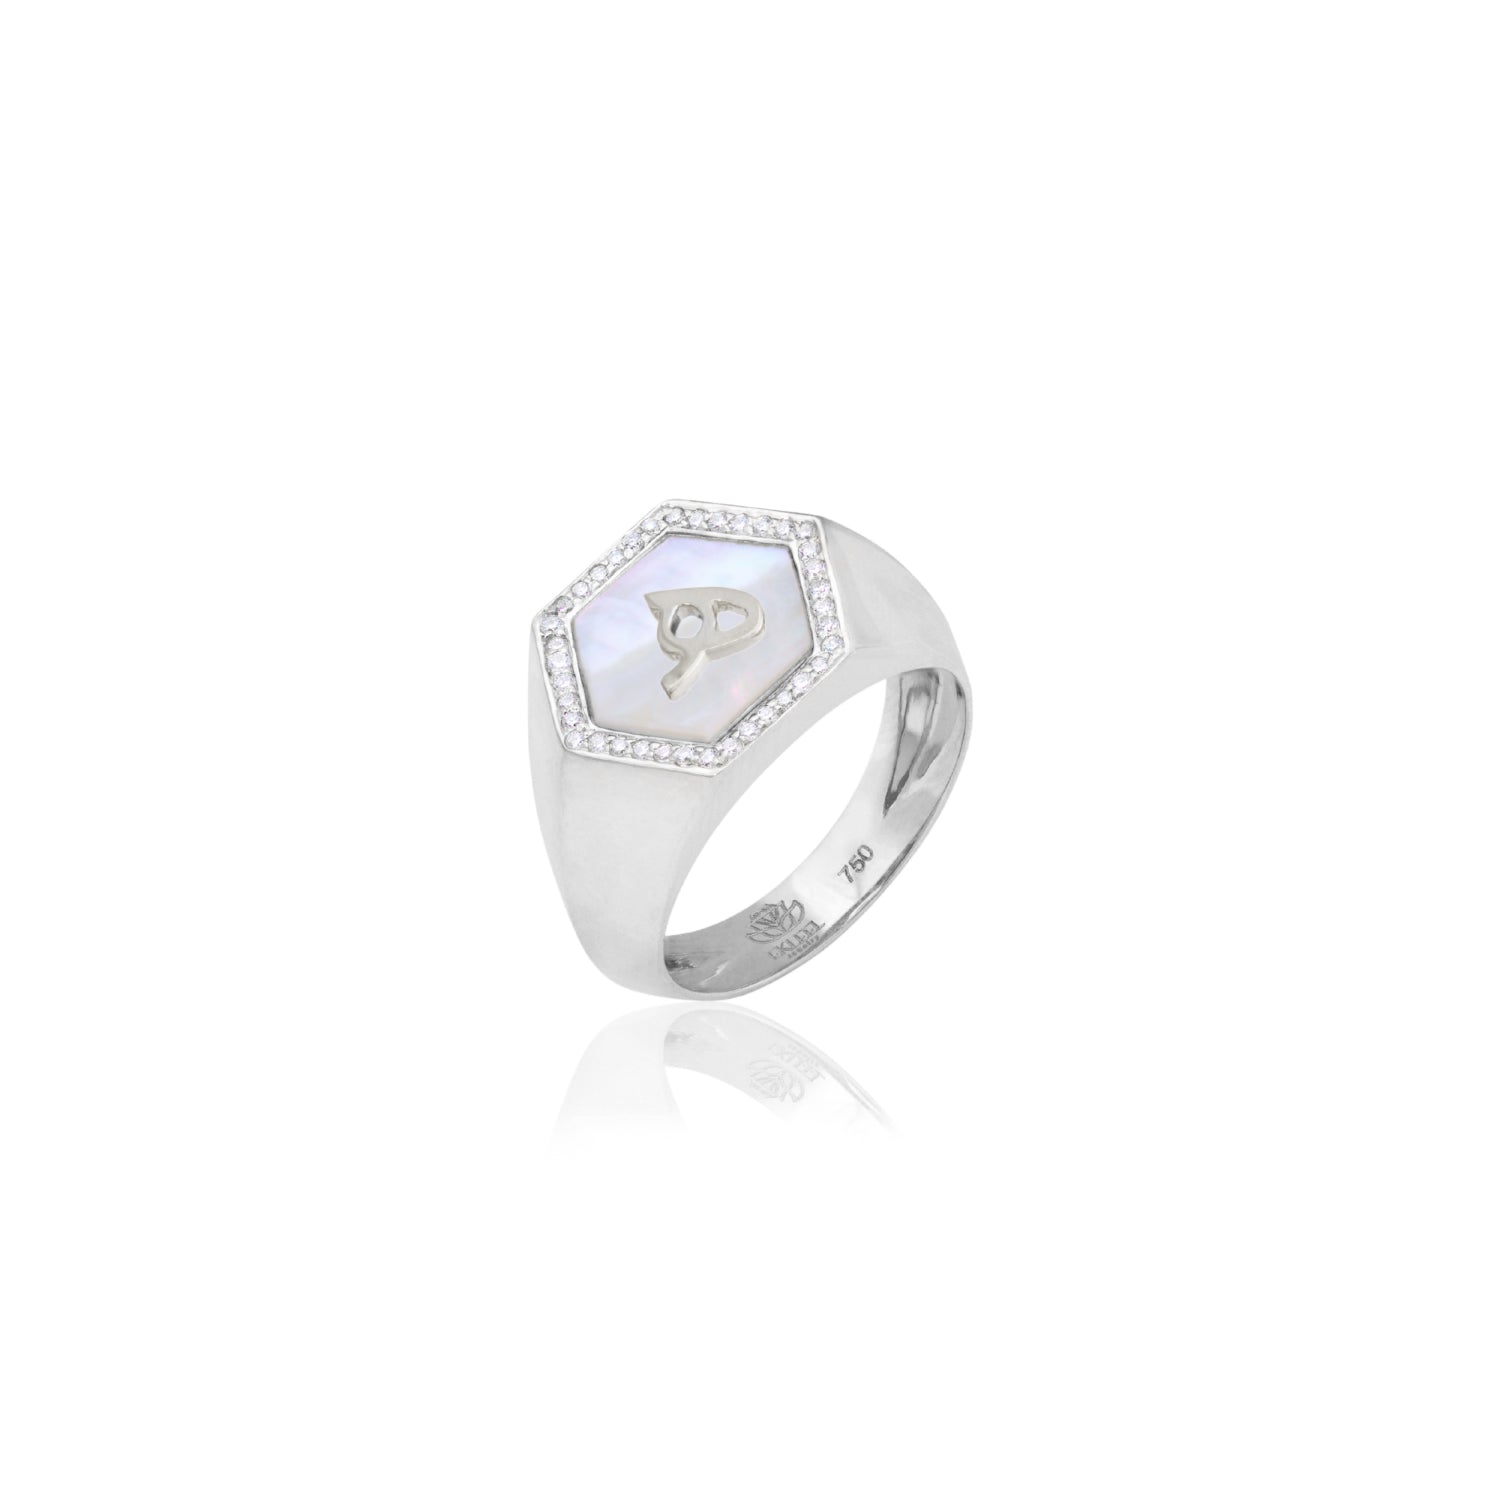 Qamoos 2.0 Letter هـ White Mother of Pearl and Diamond Signet Ring in White Gold